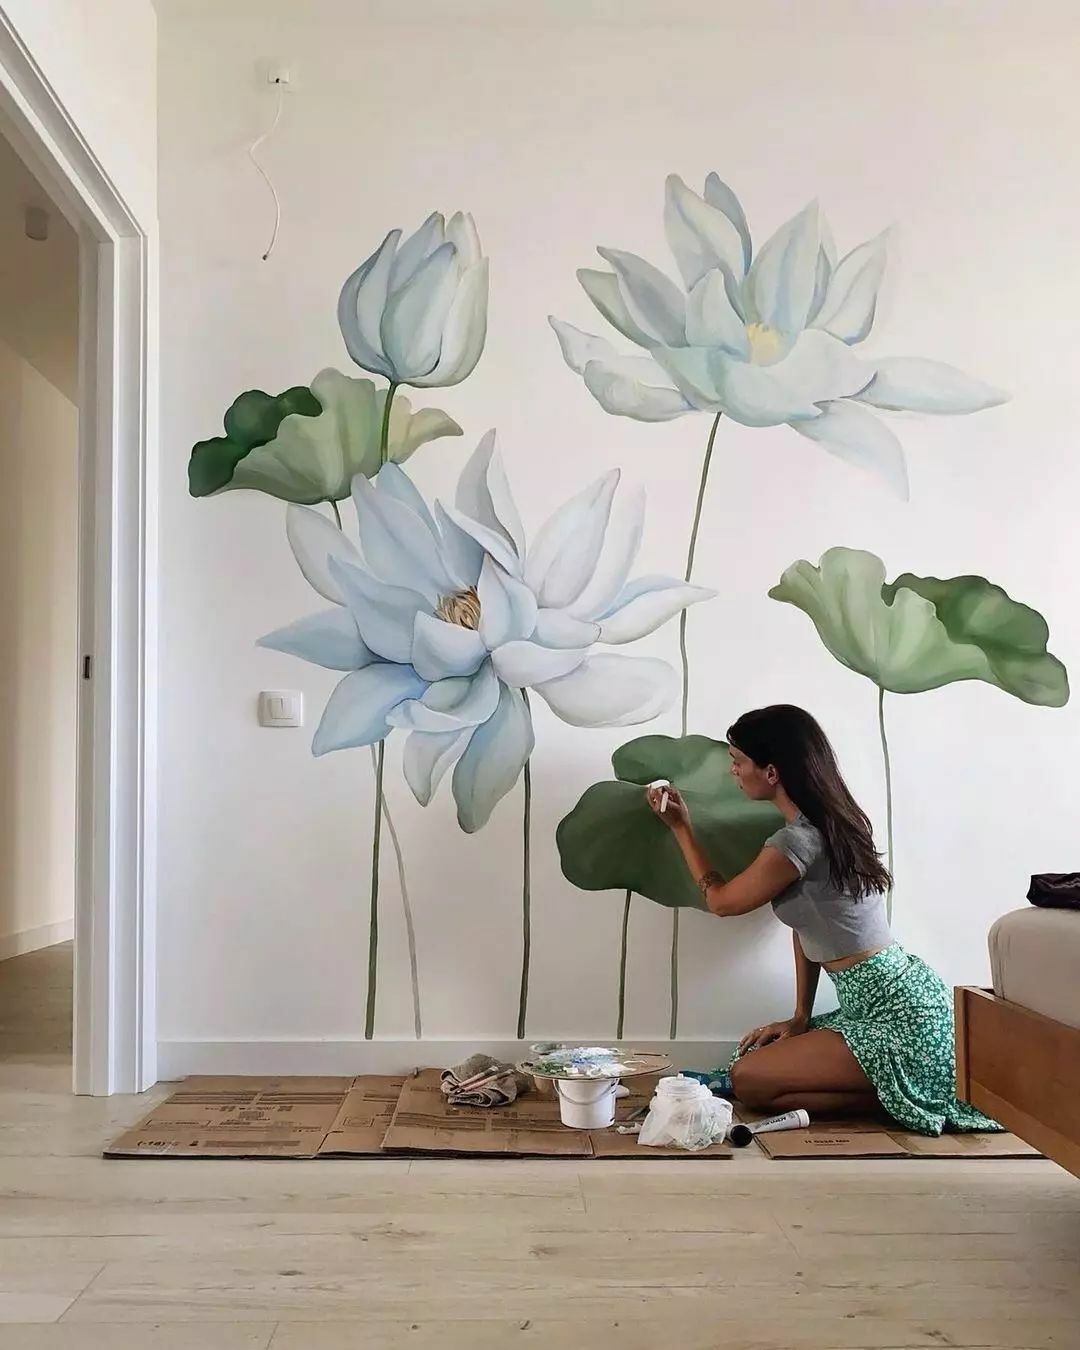 I'm In Love With This Stunning Wall Painting